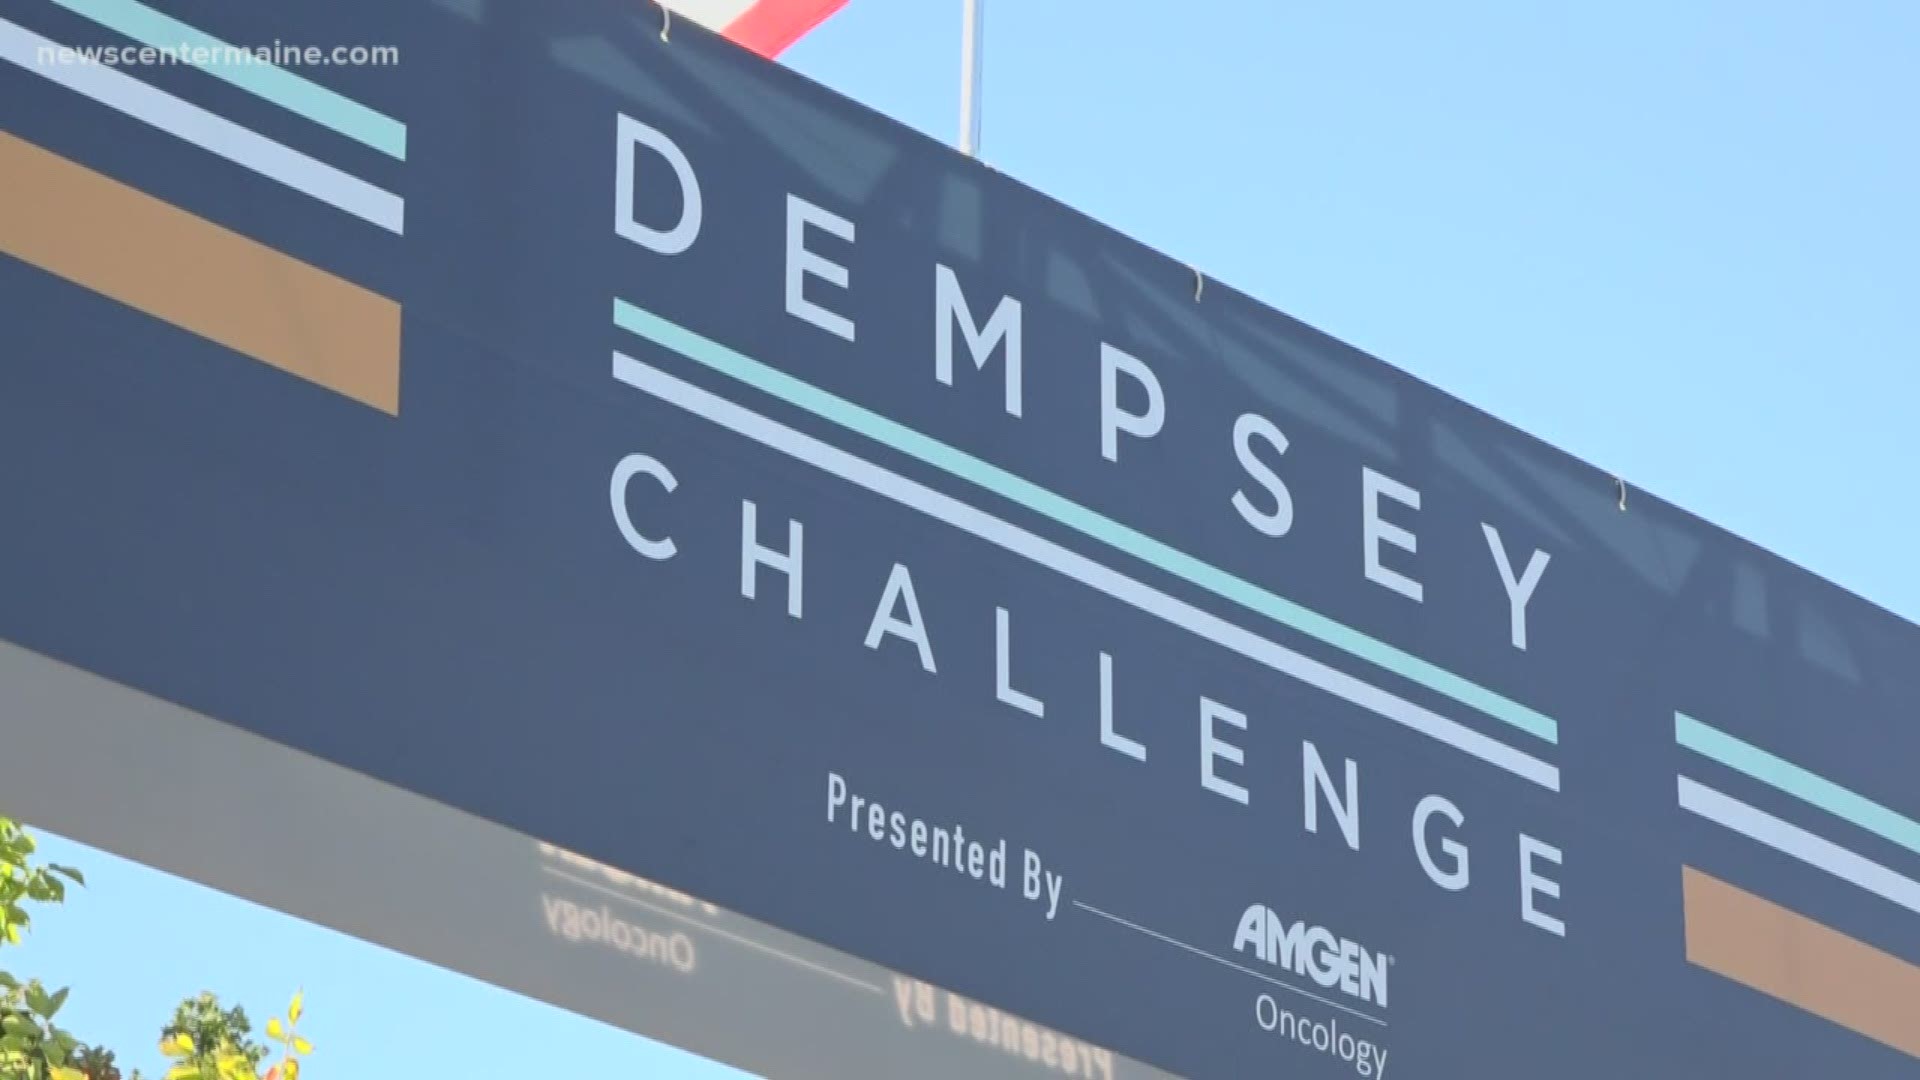 The 2019 Dempsey Challenge was a huge success by raising more than $1.2 million for the Dempsey Center. The center supports Mainers coping with cancer.